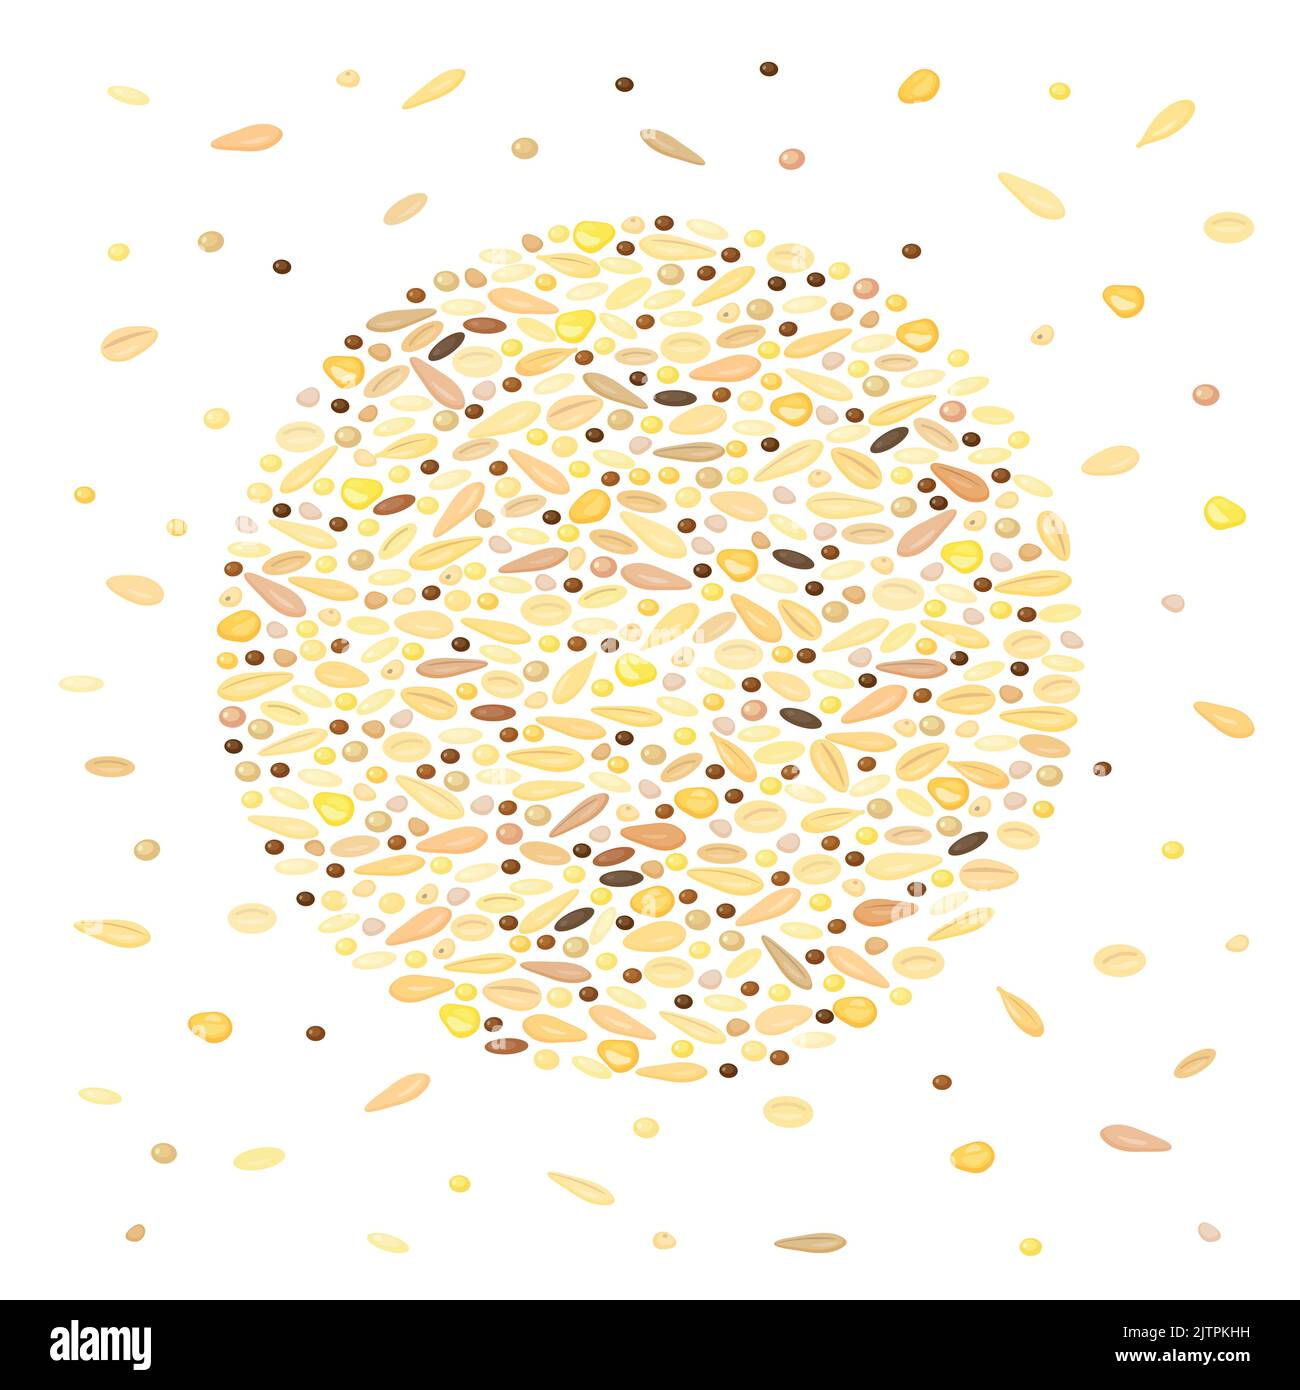 Different cartoon whole cereal grains composed in circle shape. Stock Vector